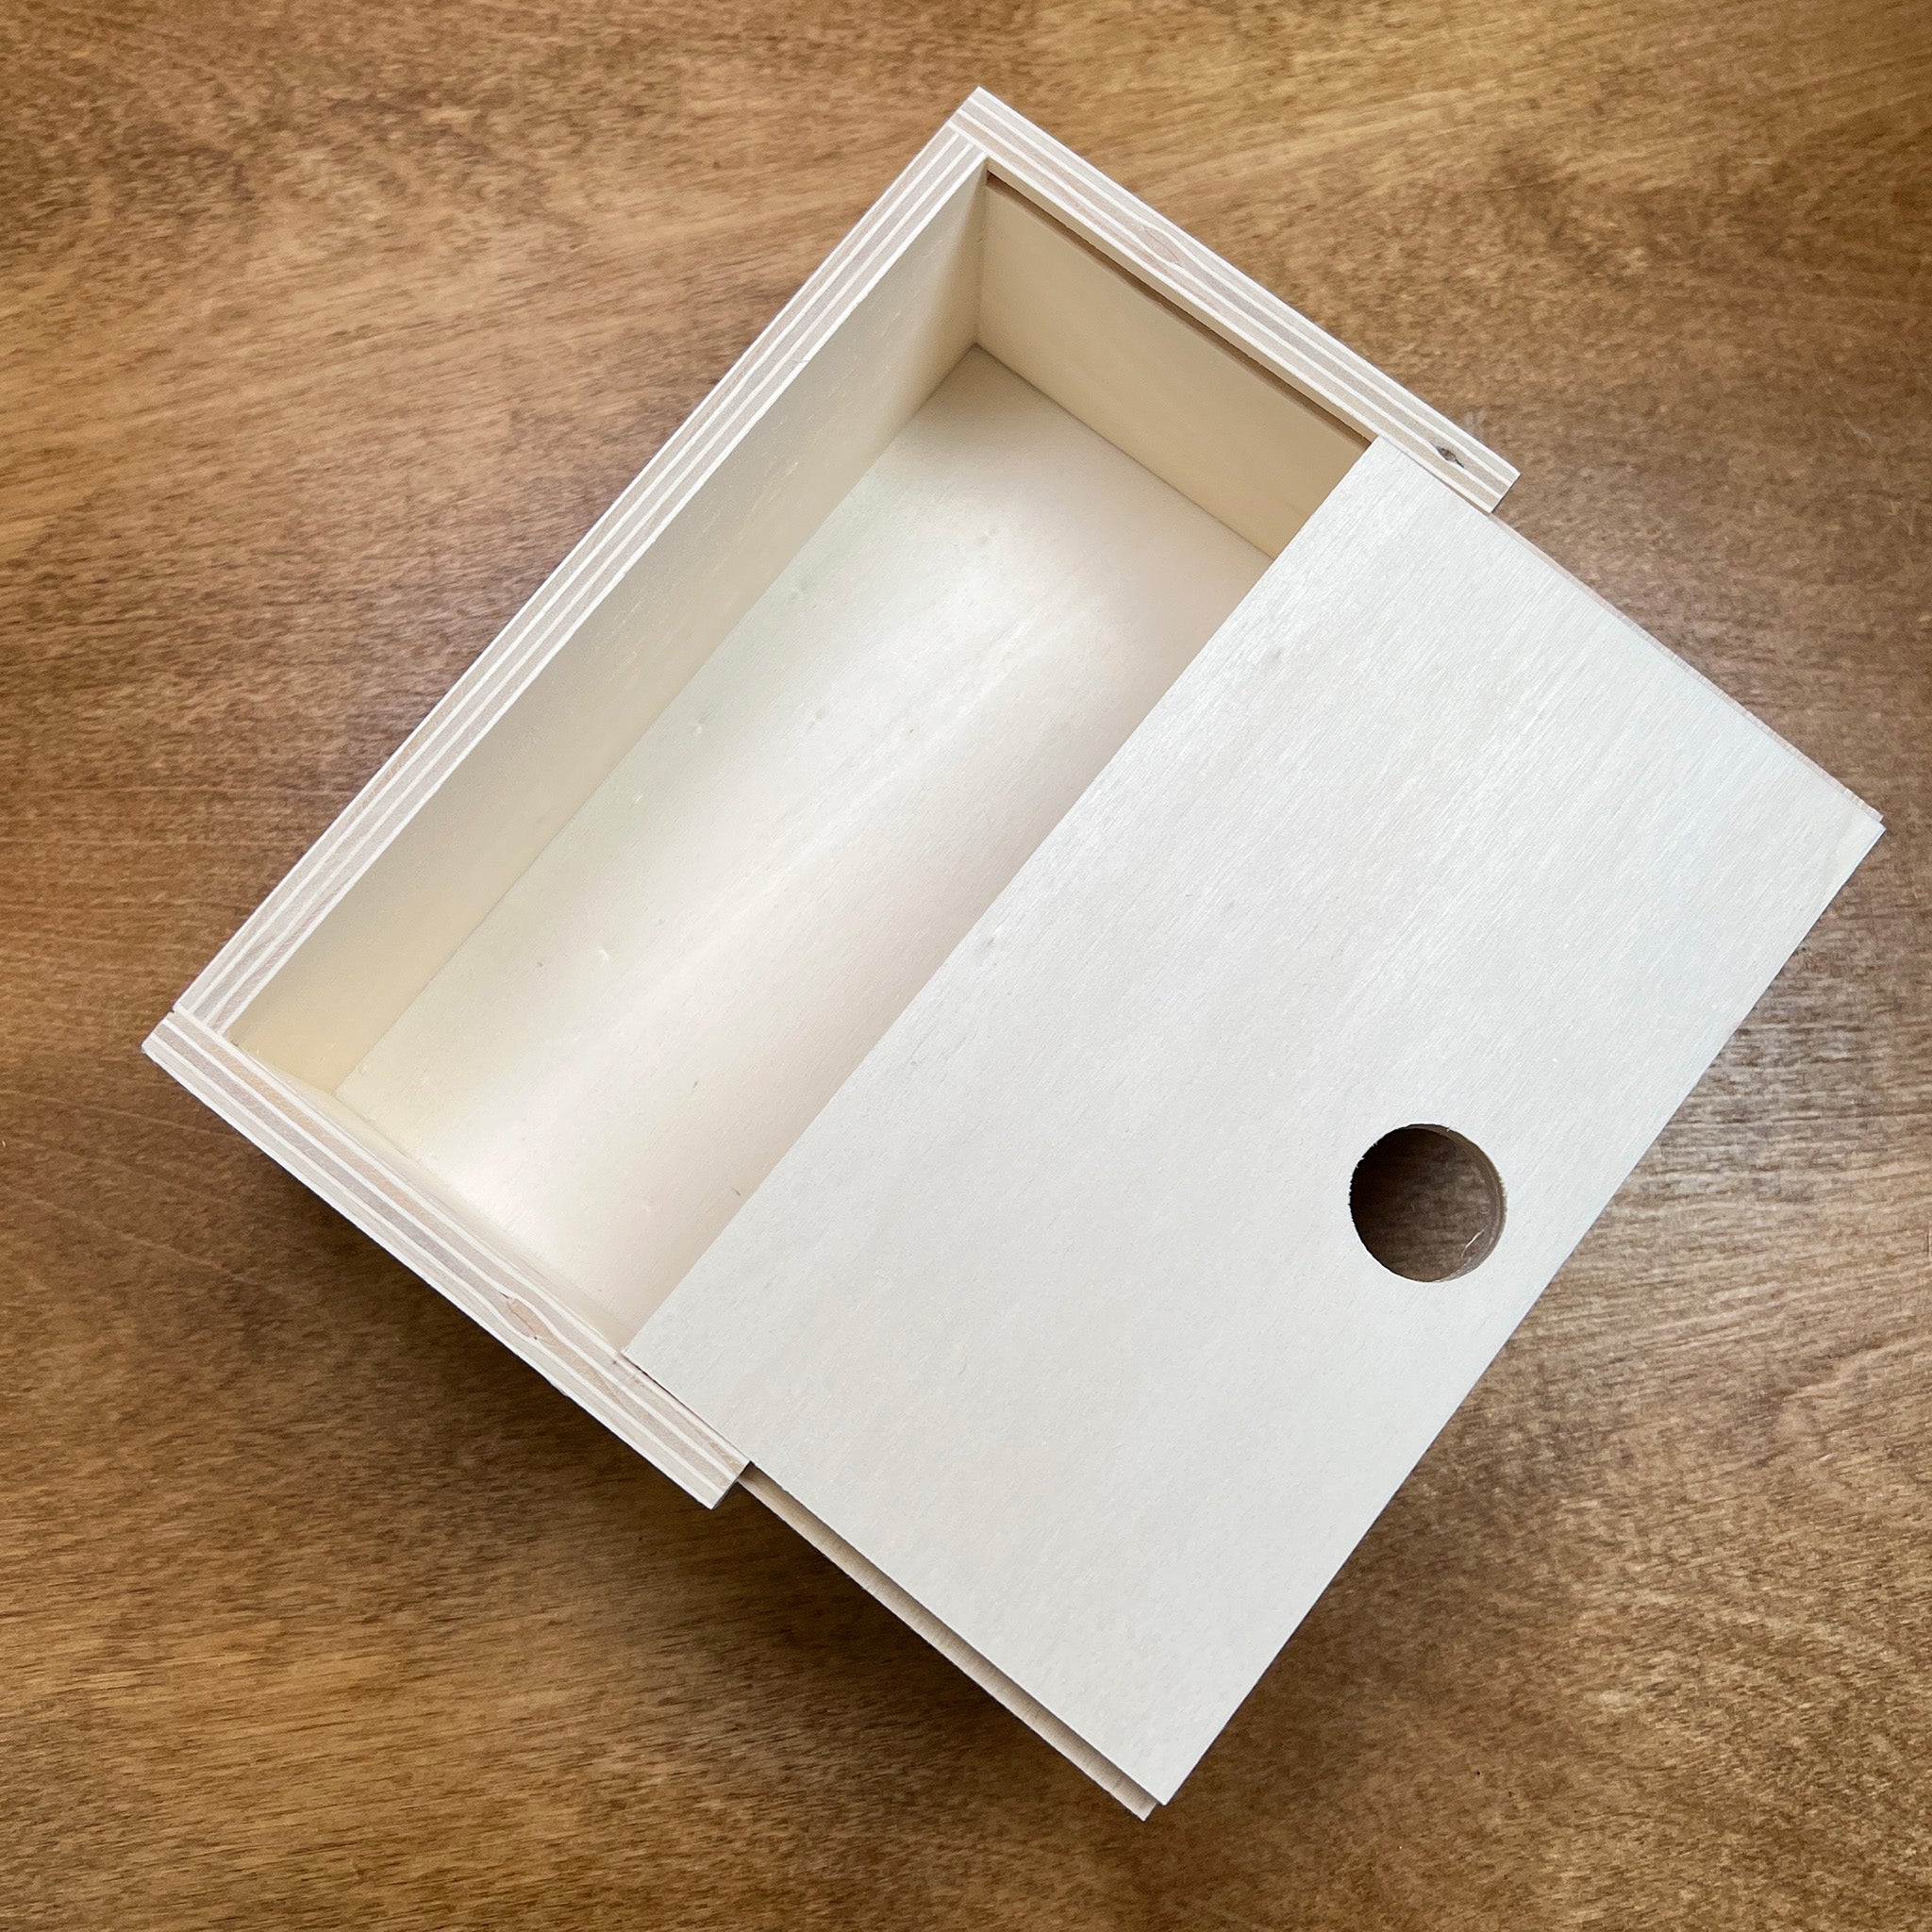 Storage Box for The Lap App